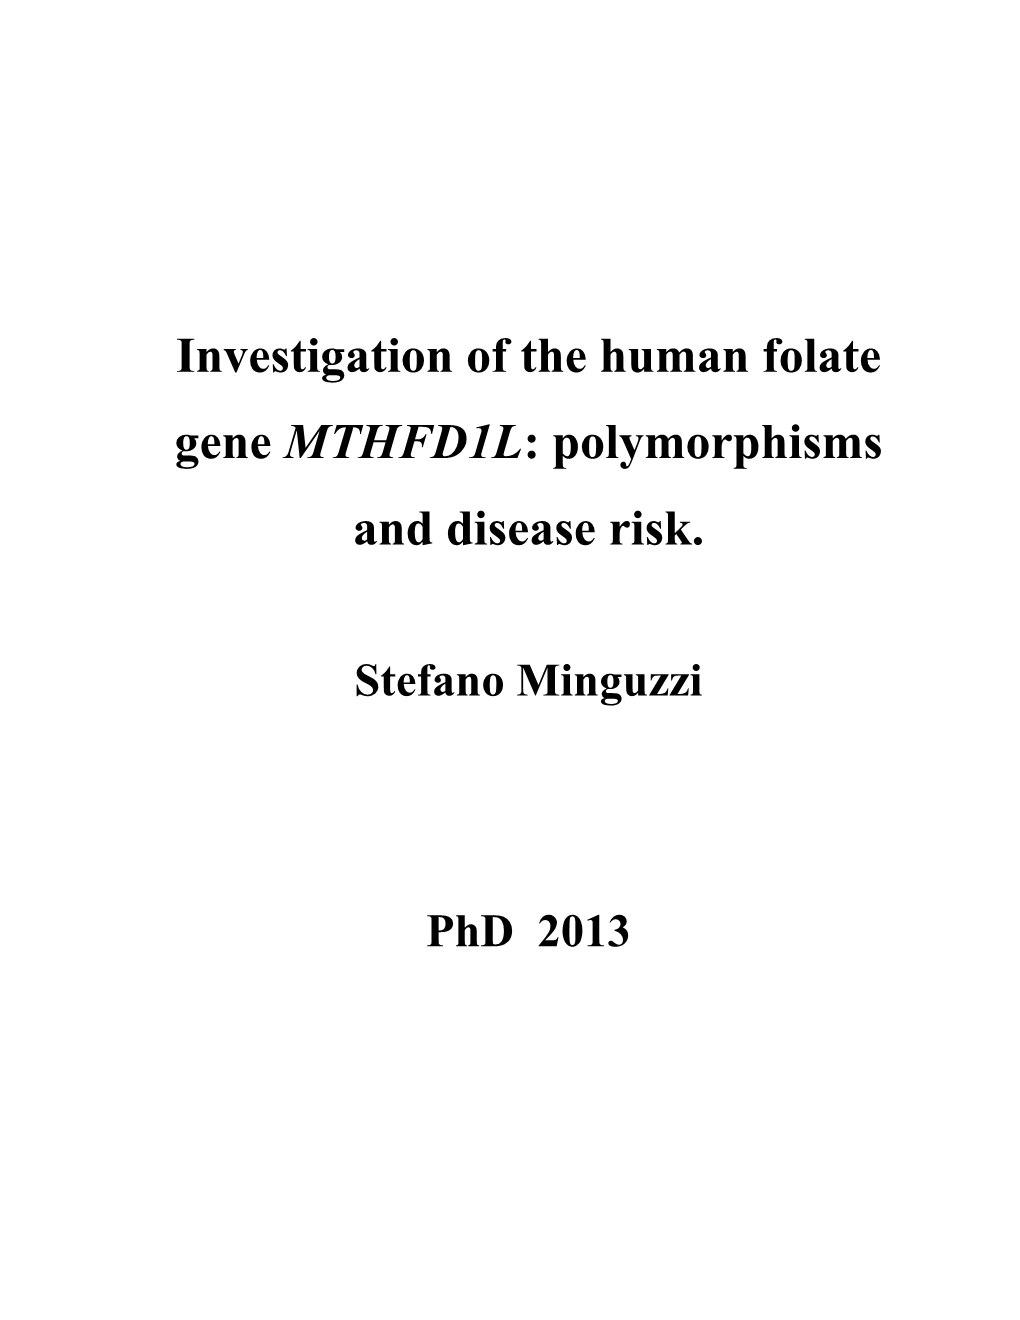 Investigation of the Human Folate Gene MTHFD1L: Polymorphisms and Disease Risk